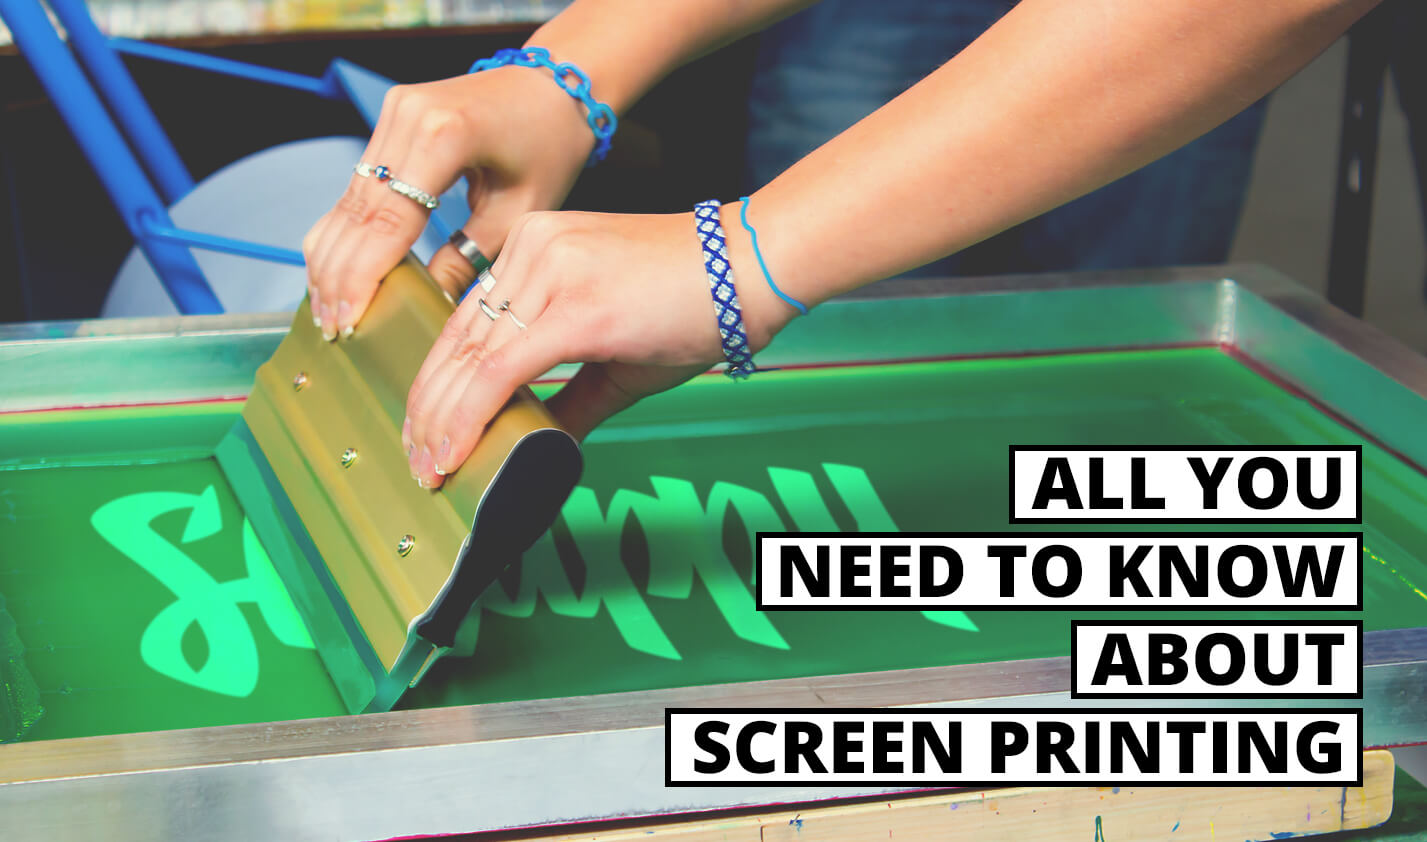 All You Need To Know About Screen Printing